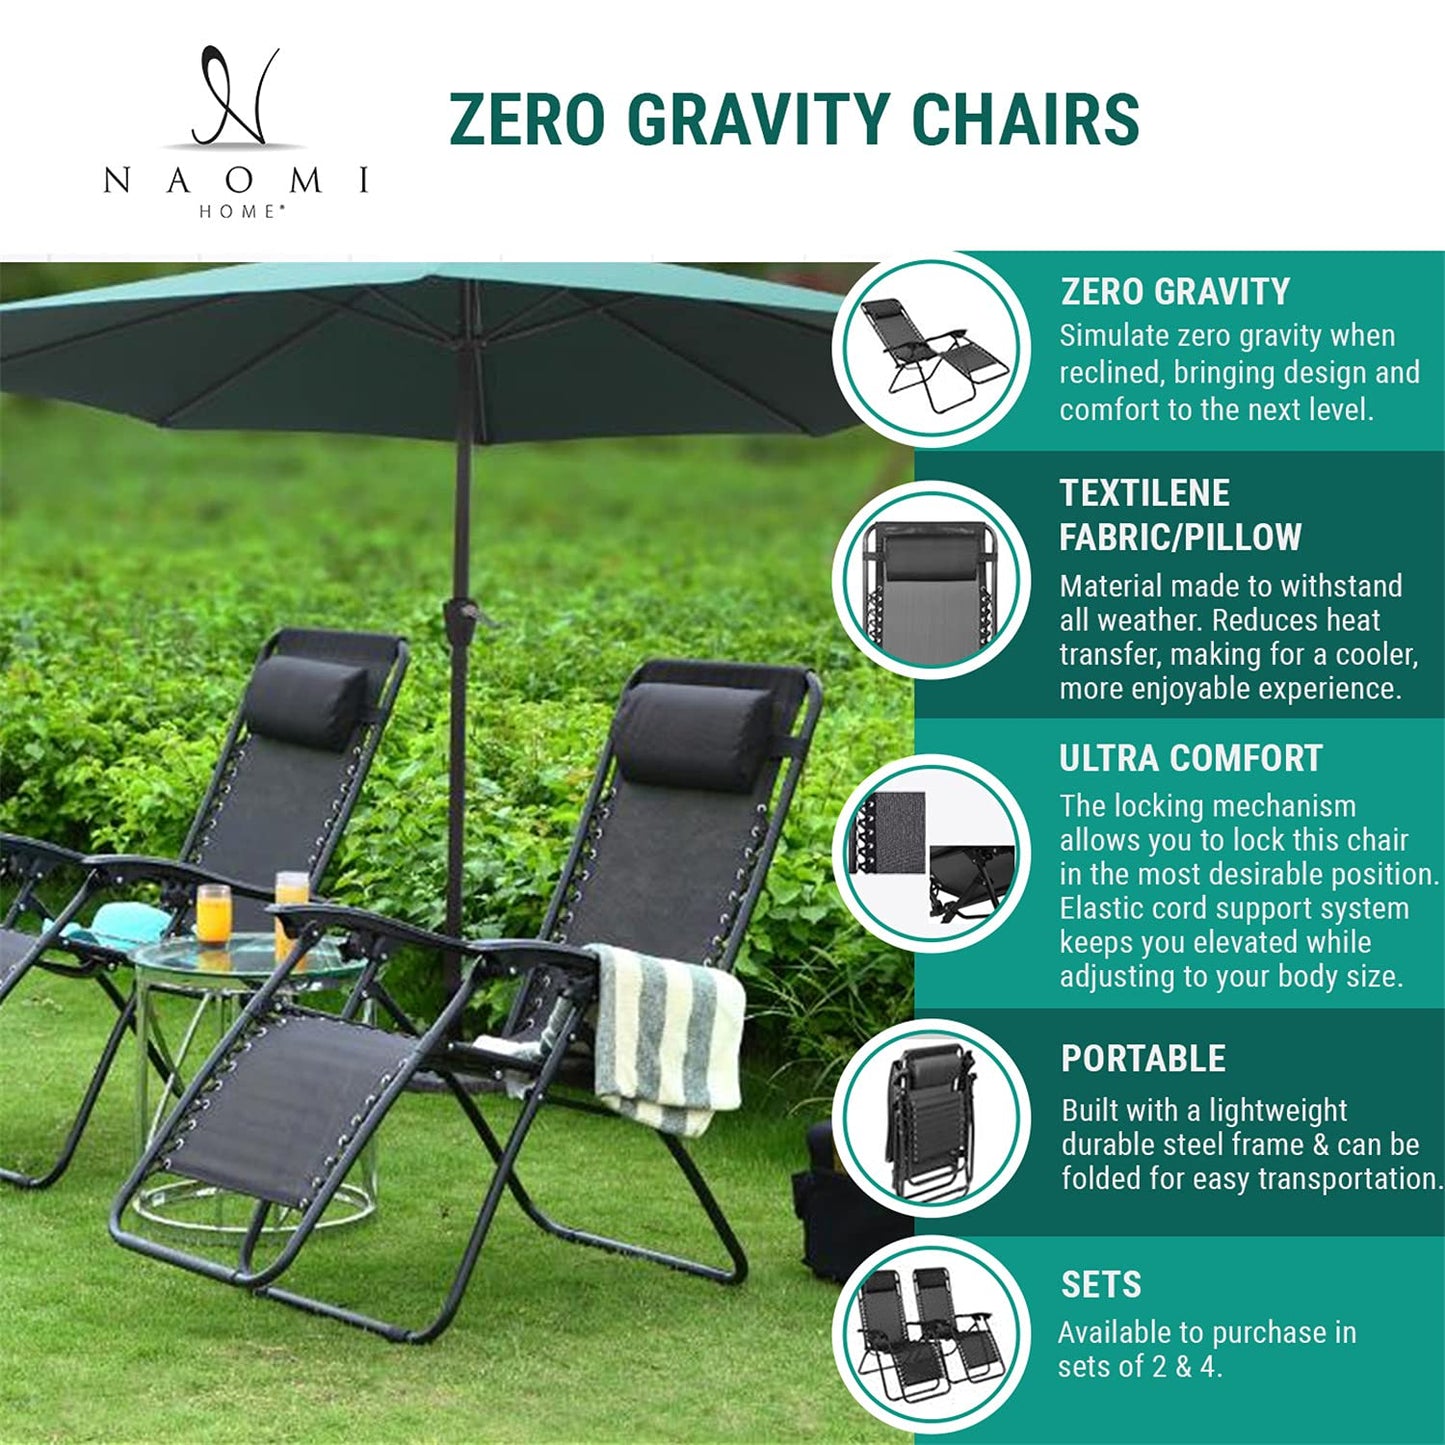 Zero Gravity Chairs Set of 2 Pool Lounge Chair Zero Gravity Recliner Lawn Patio Outdoor Porch Beach Backyard Anti Gravity Chair Folding Reclining Camping Chair with Headrest by Naomi Home - Grey Modern